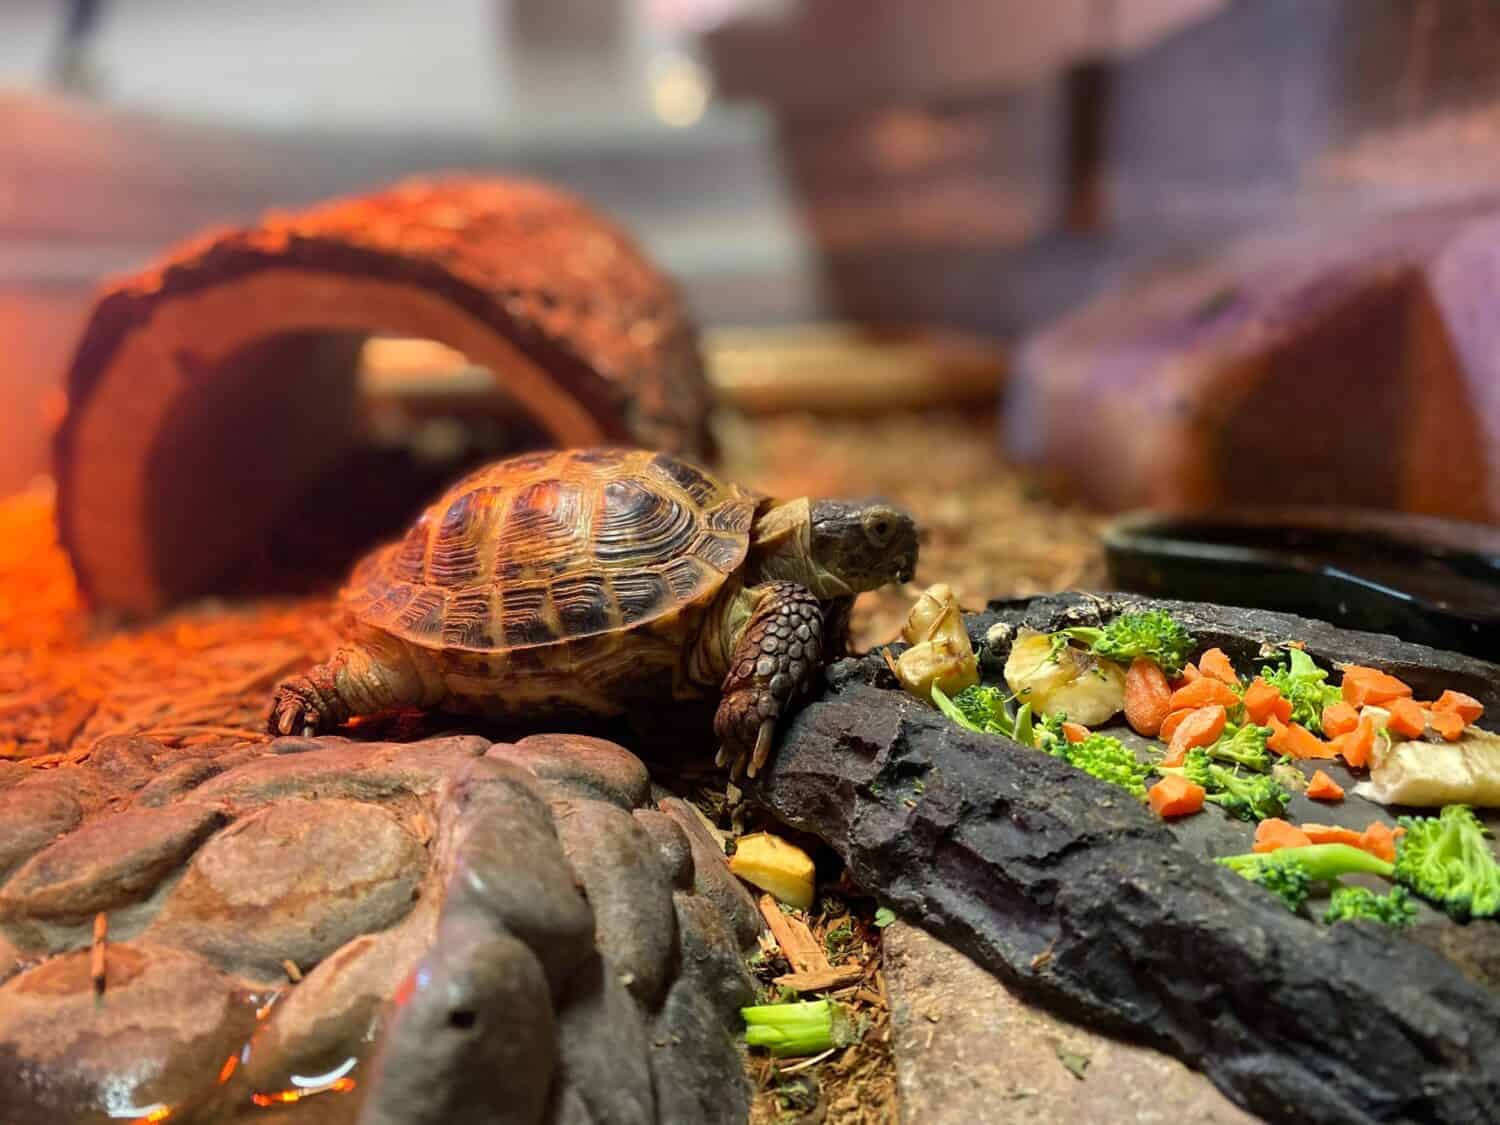 A little turtle eating carrots and broccoli from a rocky dish in a terrarium with red light